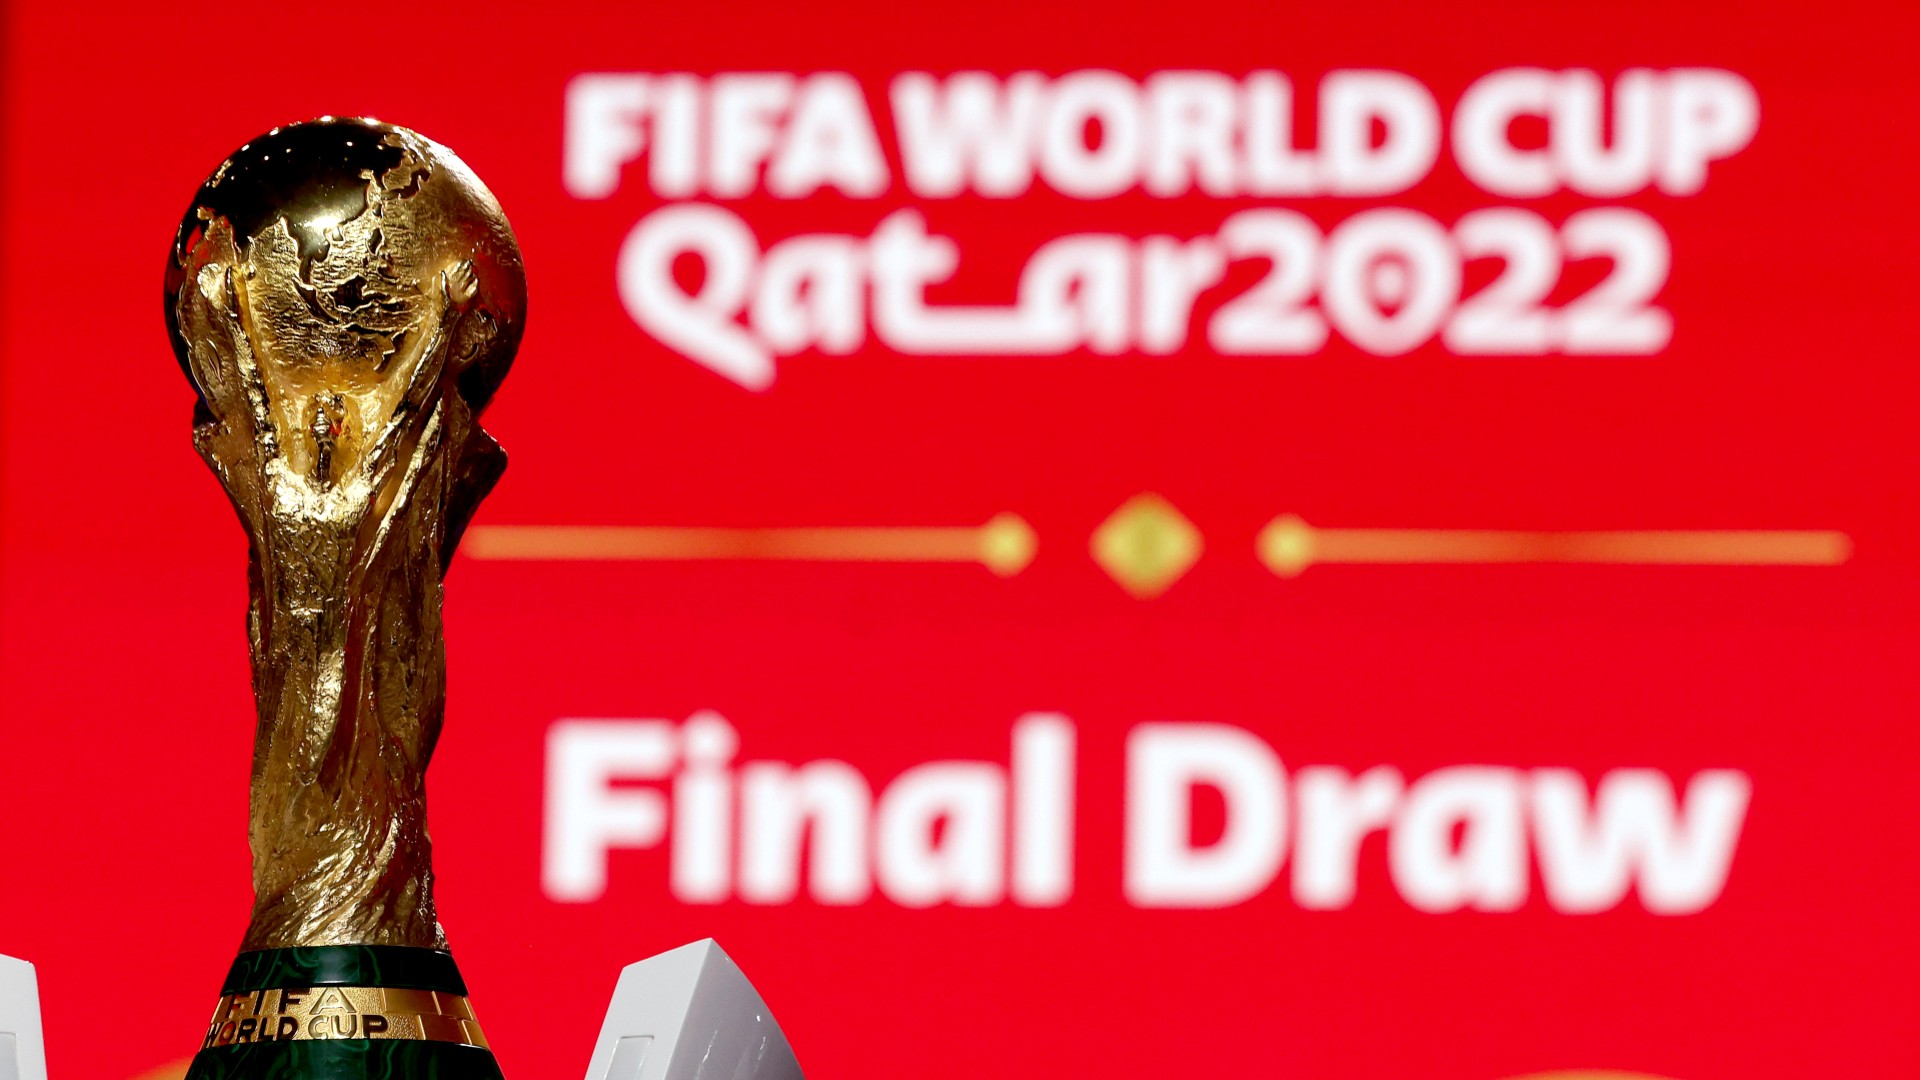 World Cup draw 2022: Full group results, teams, match schedule, fixtures revealed for Qatar